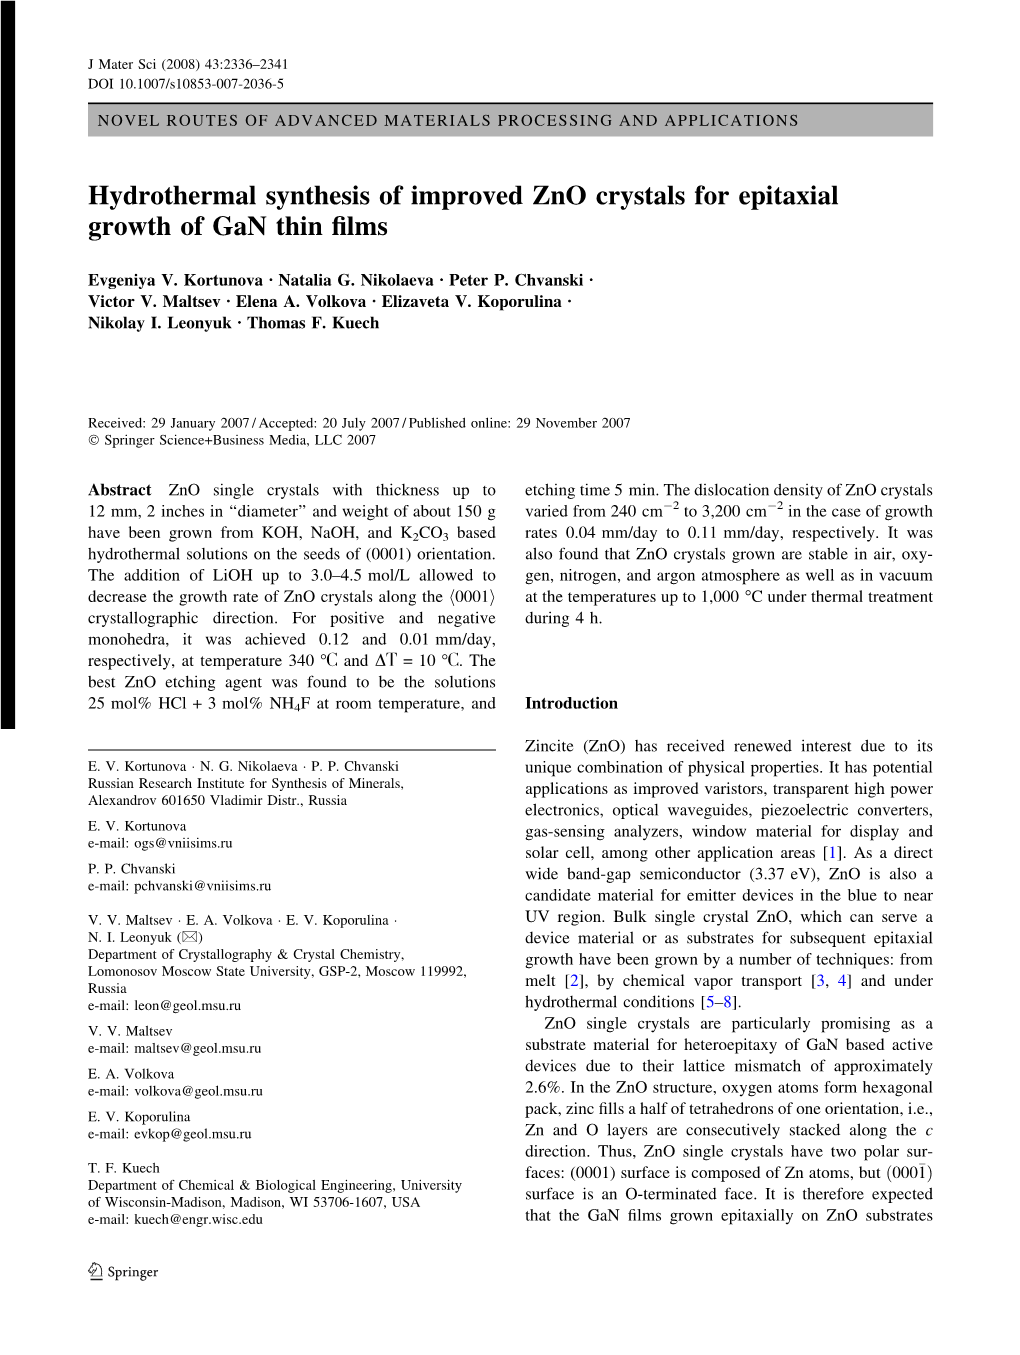 Hydrothermal Synthesis of Improved Zno Crystals for Epitaxial Growth of Gan Thin Films